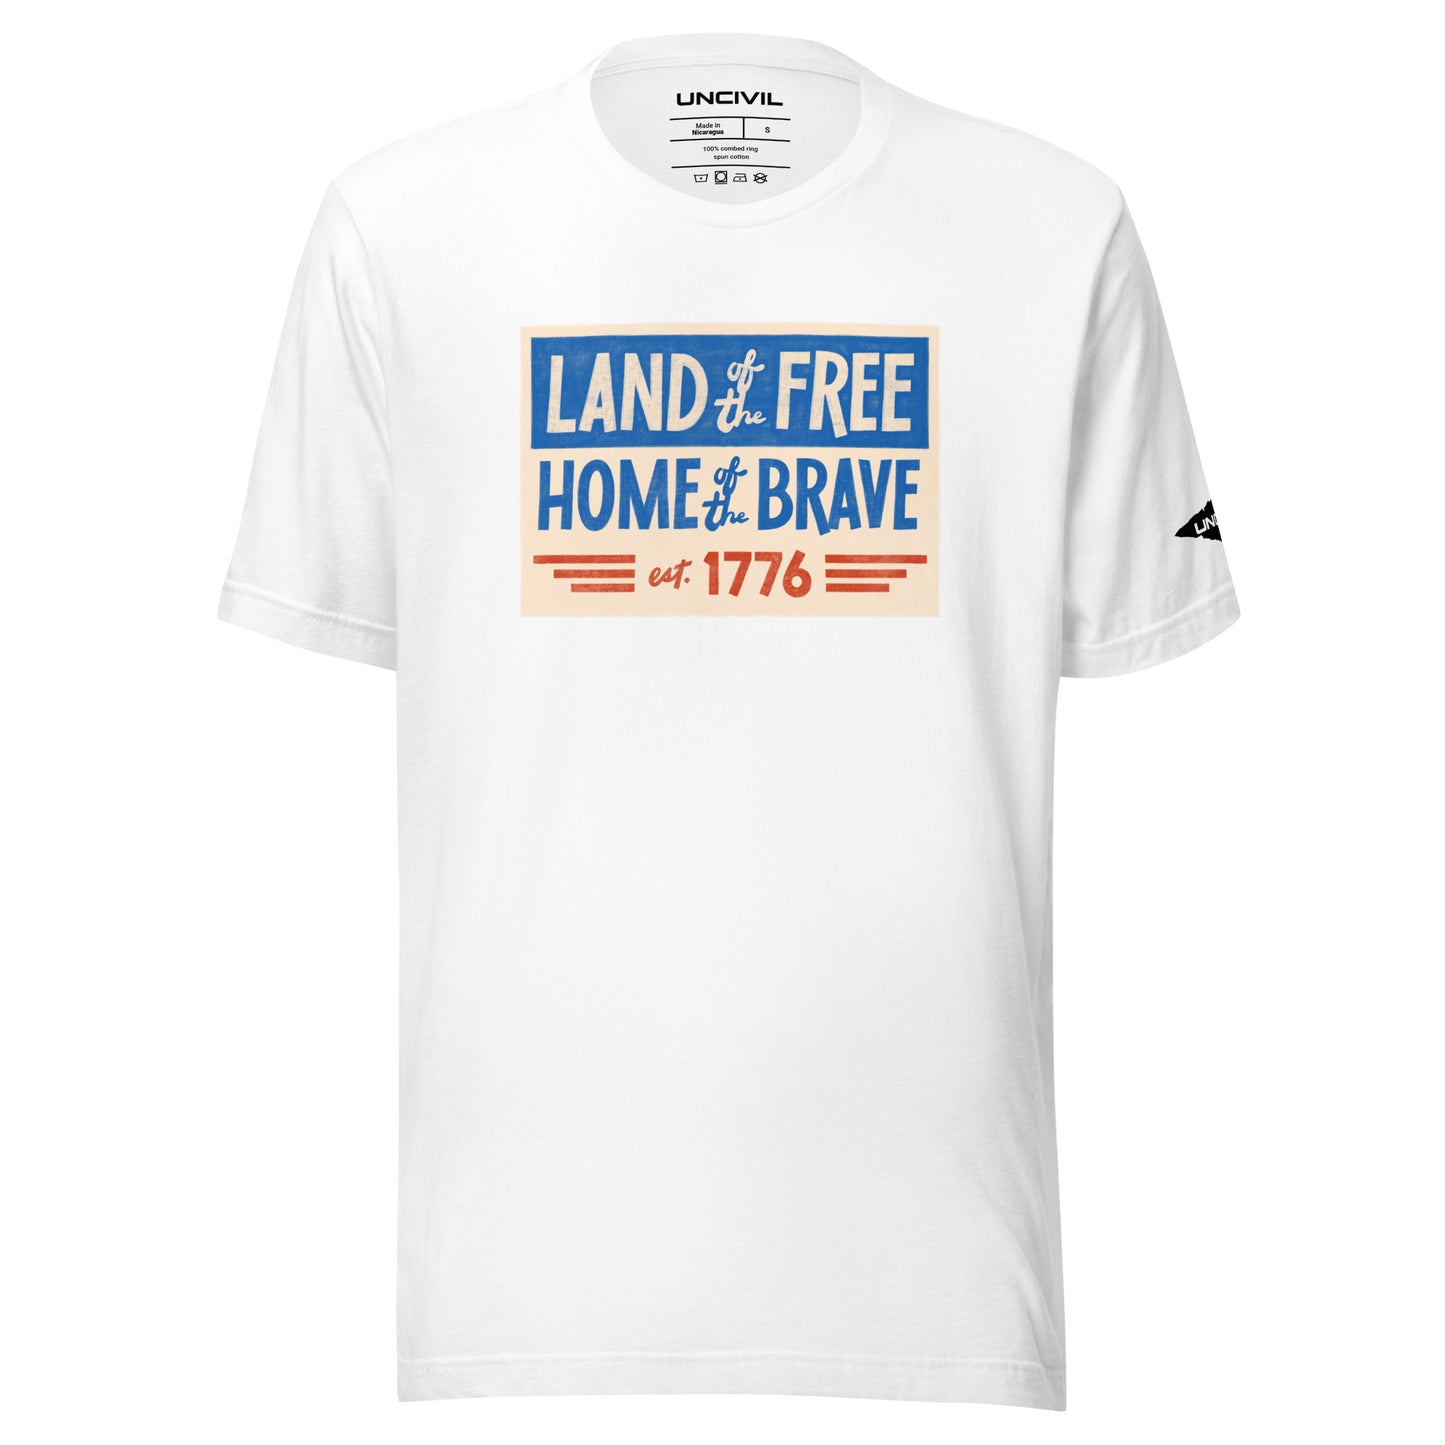 Land of the Free Home of the Brave t-shirt, white unisex patriotic shirt.